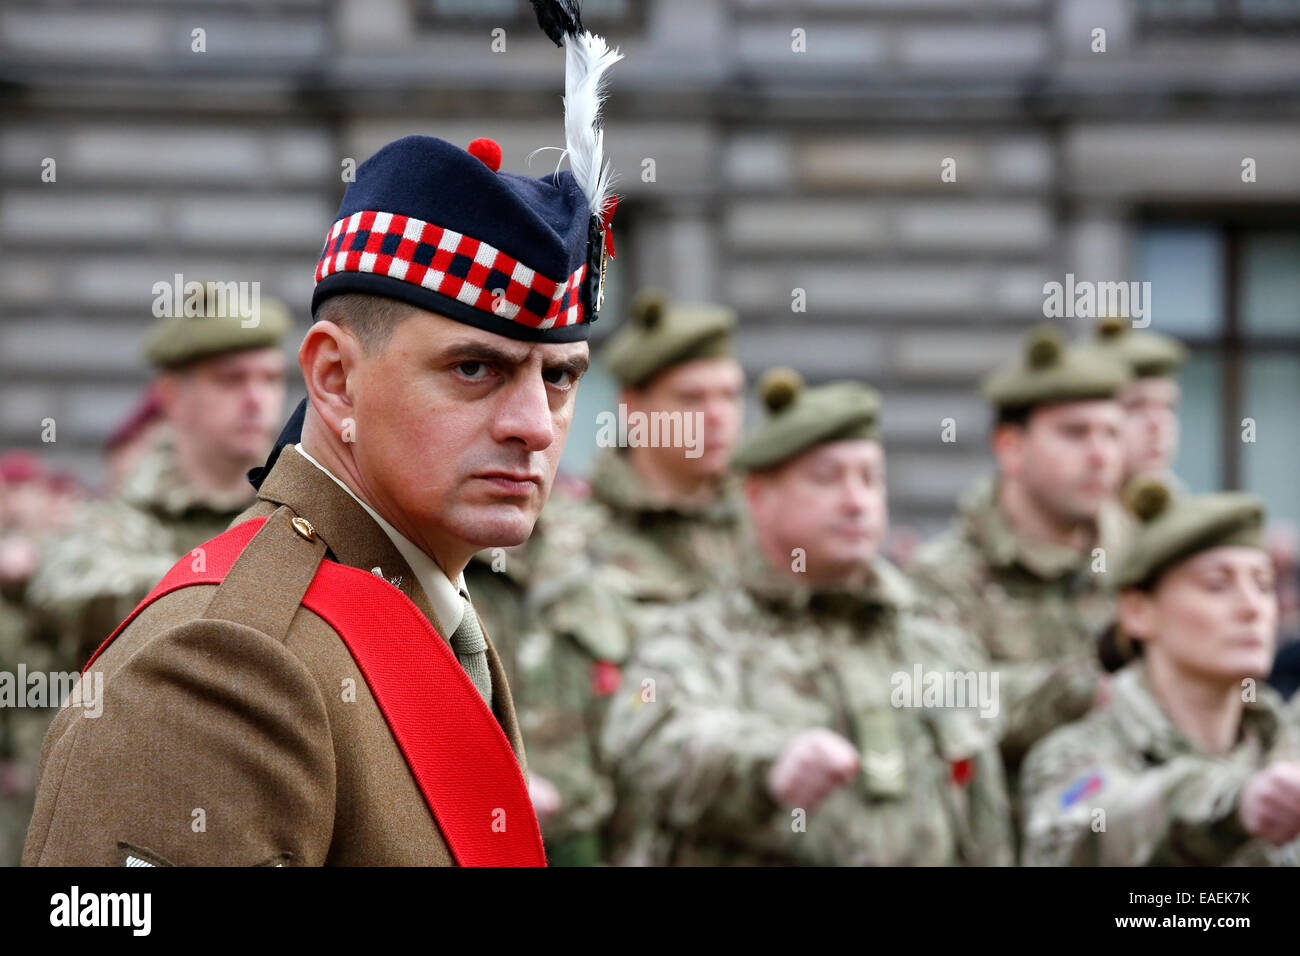 Soldier on parade with others marching in the background, Glasgow, Scotland, UK Stock Photo